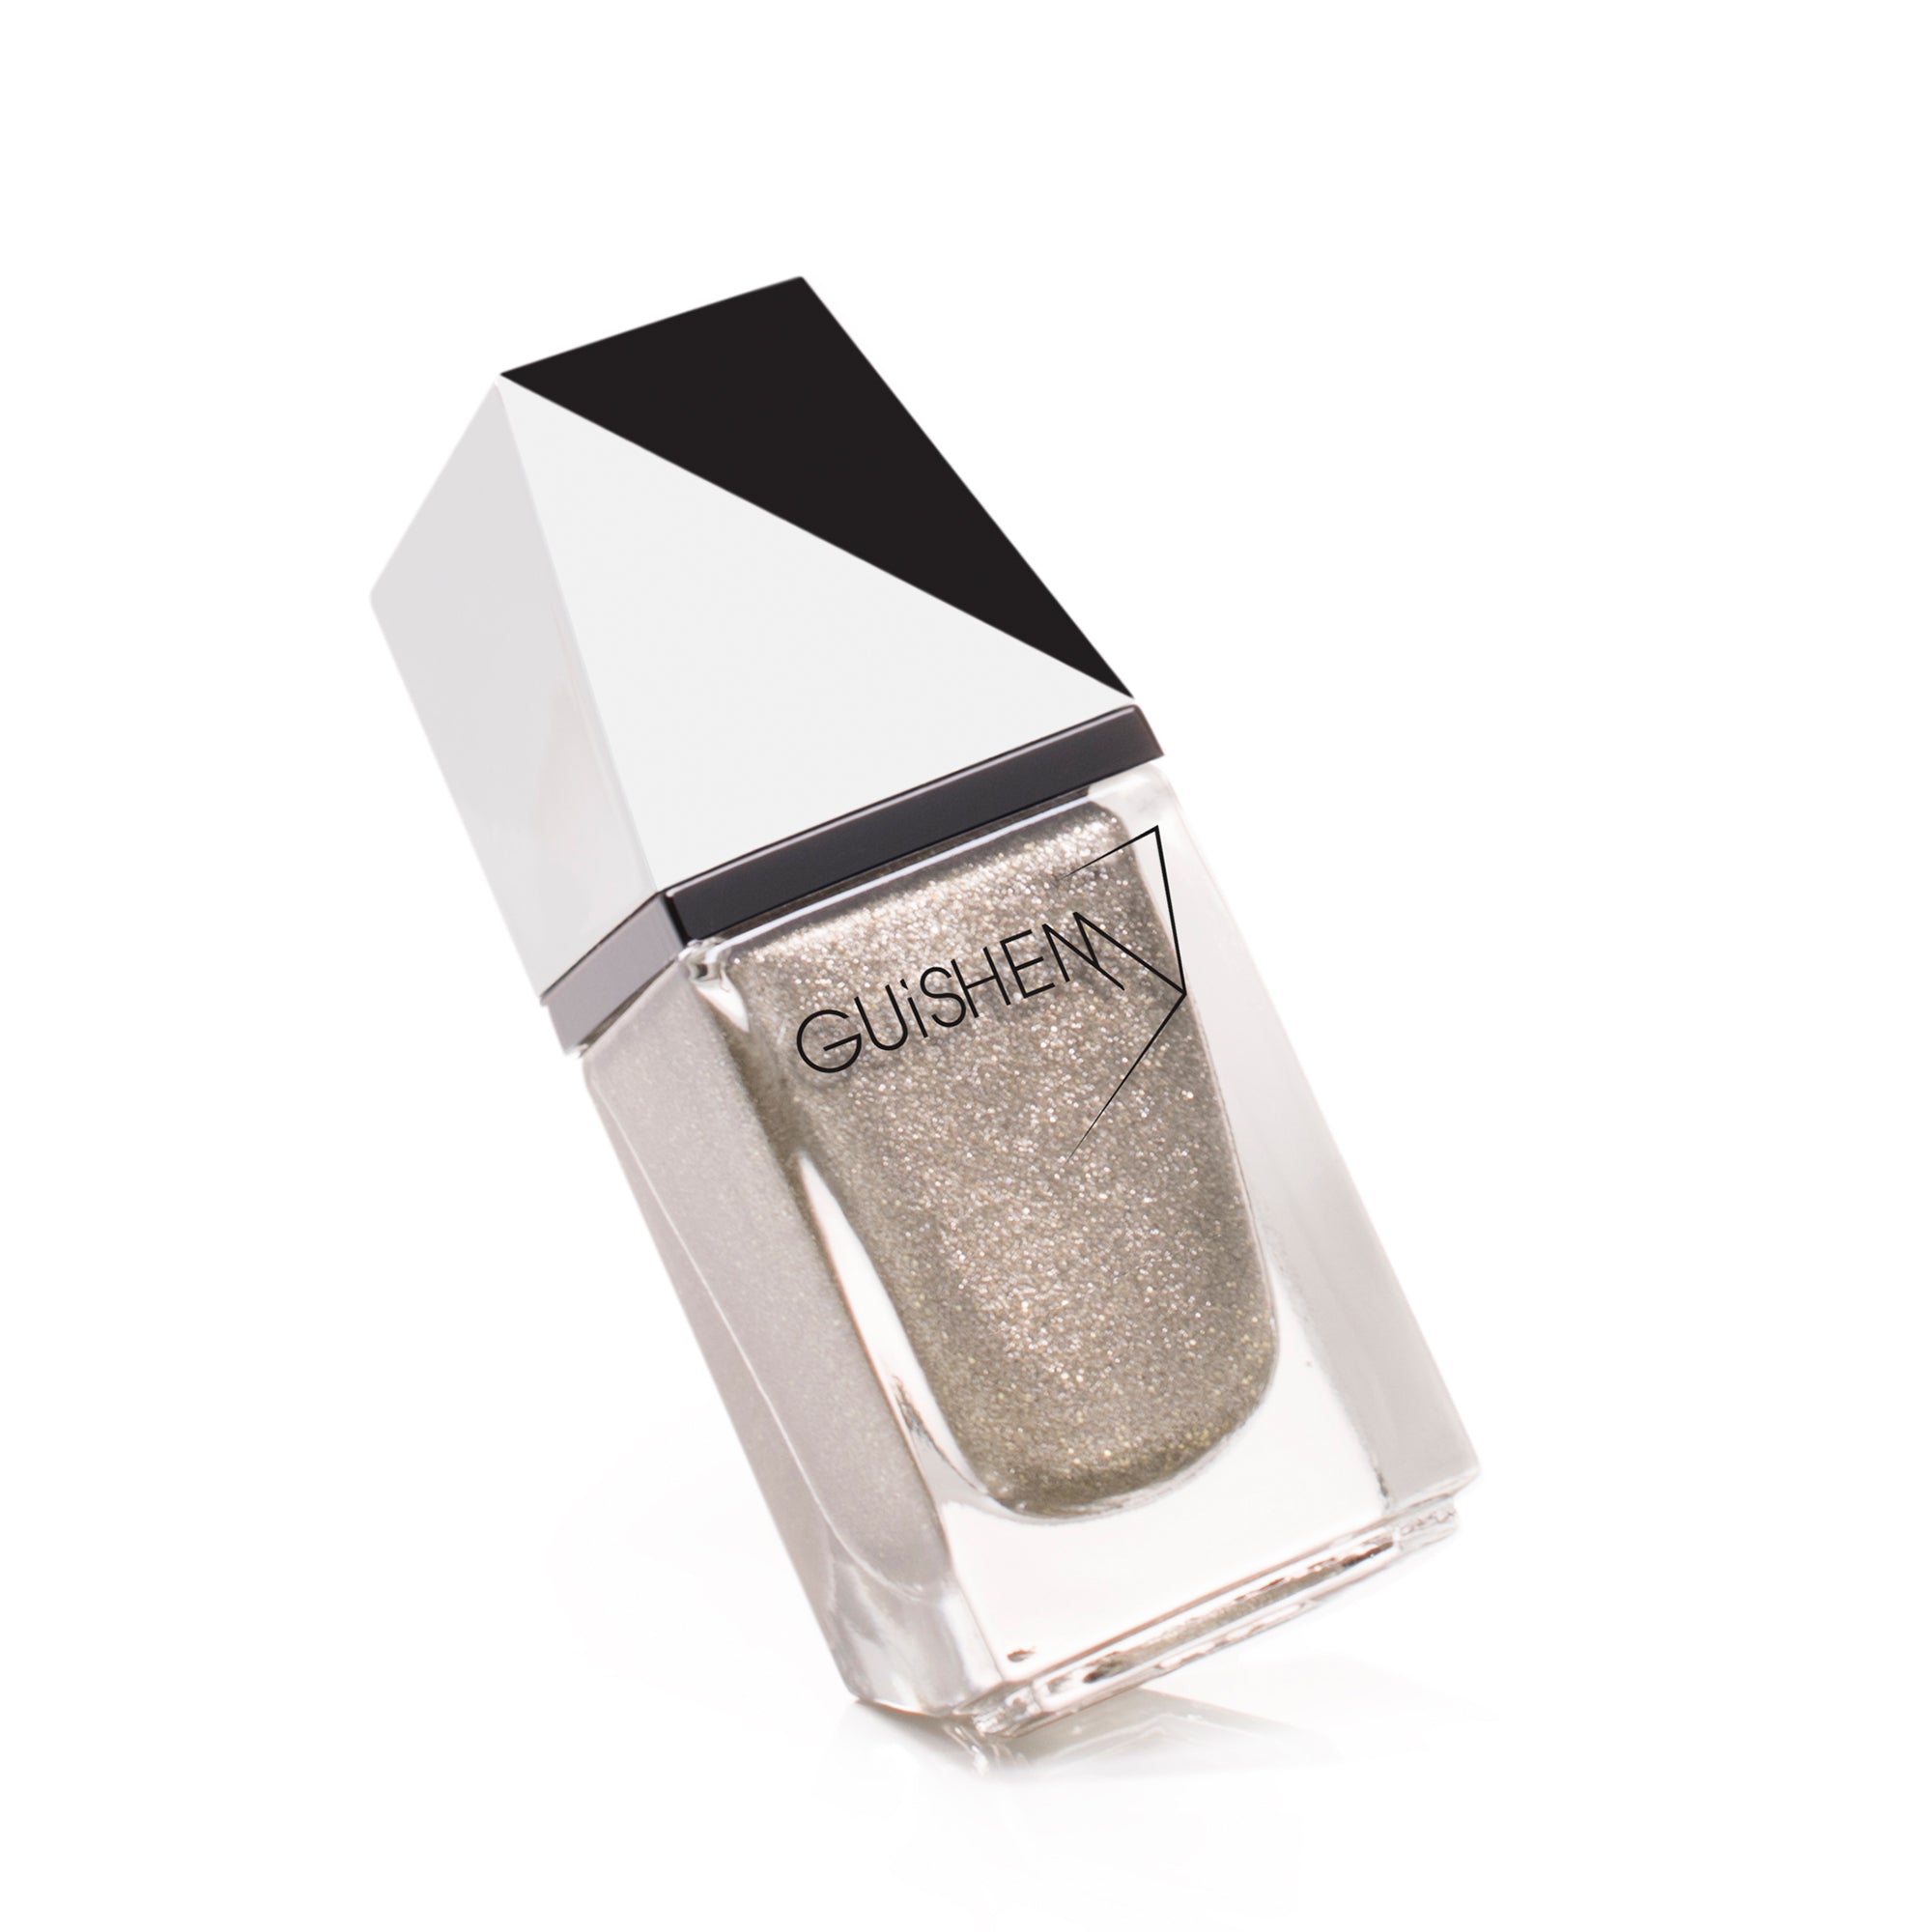 GUiSHEM - LE VERNIS - FROSTED ALMOND 630